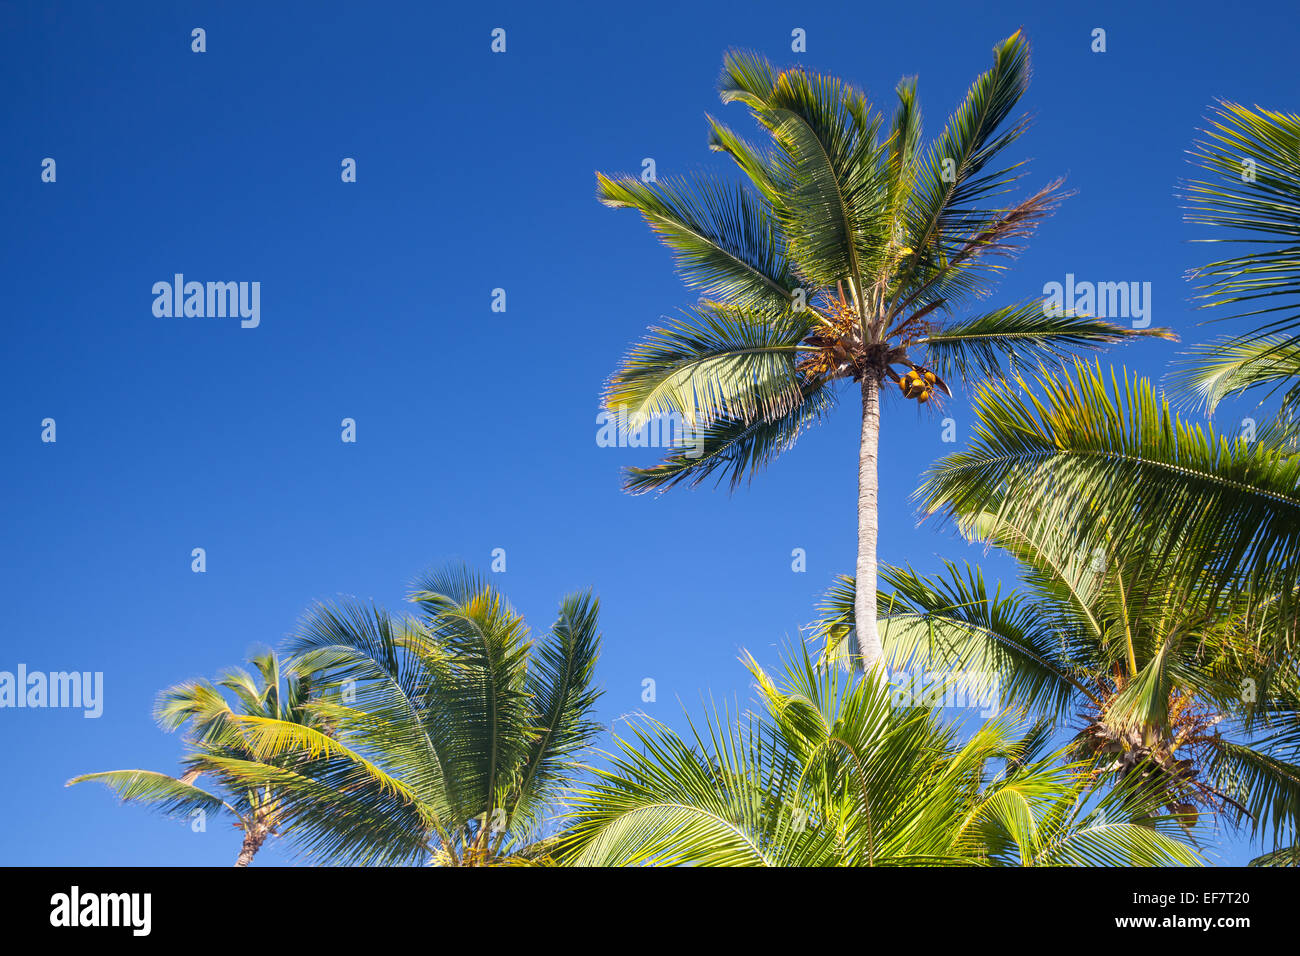 Coconut palm trees over clear blue sky. Natural photo background Stock Photo